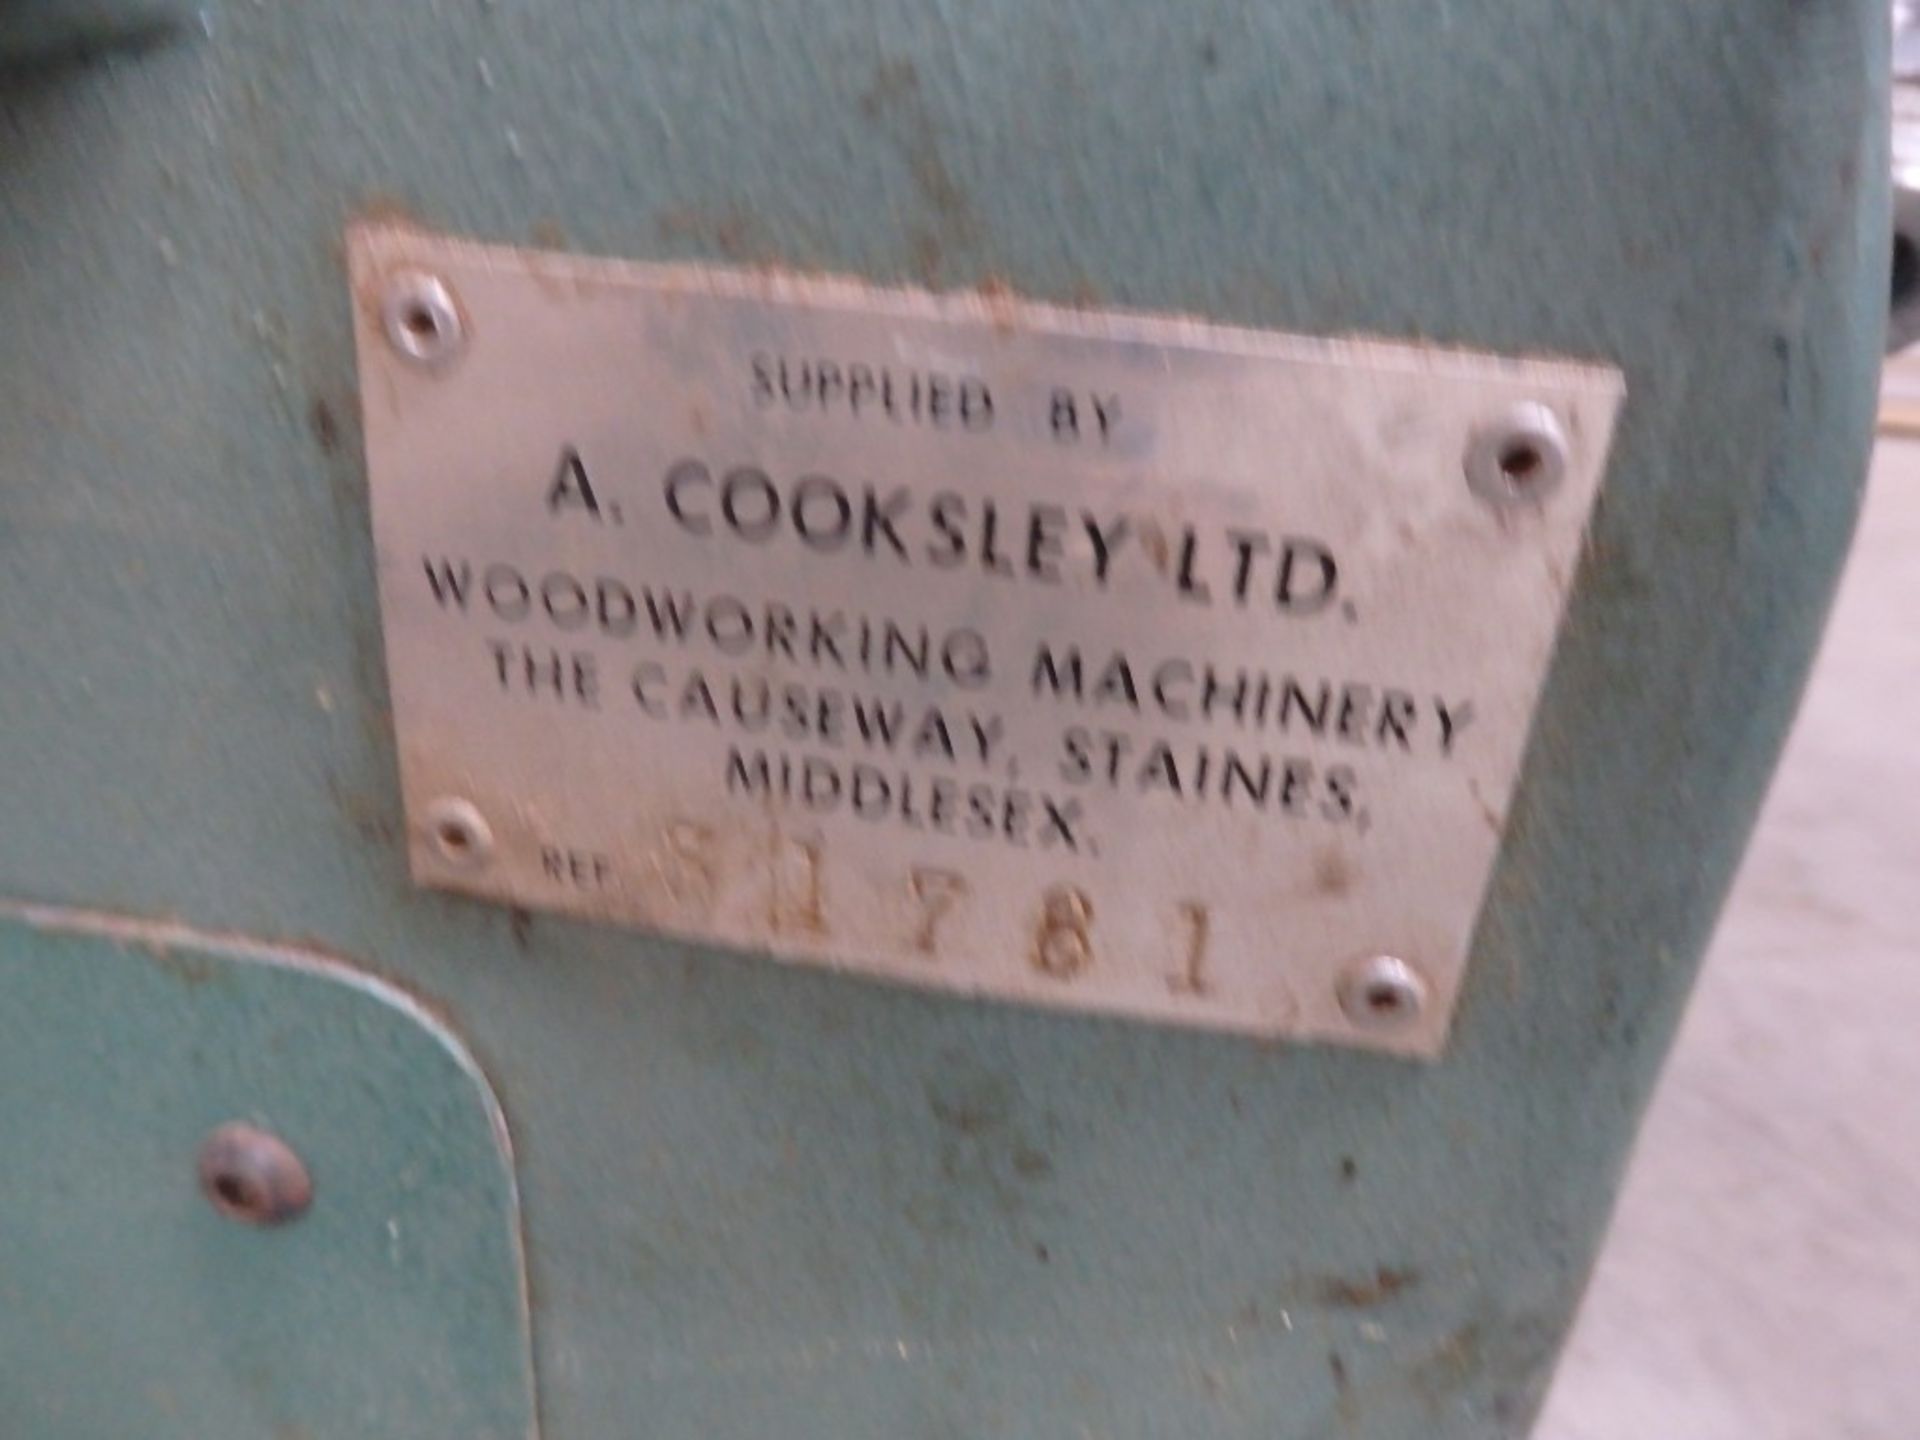 1 x COOKSLEY HEAVY DUTY UNIVERSAL MACHINE,(12"X9" PLANER THICKNESSER & 16" SAW COMBINATION) - Ref - Image 12 of 12